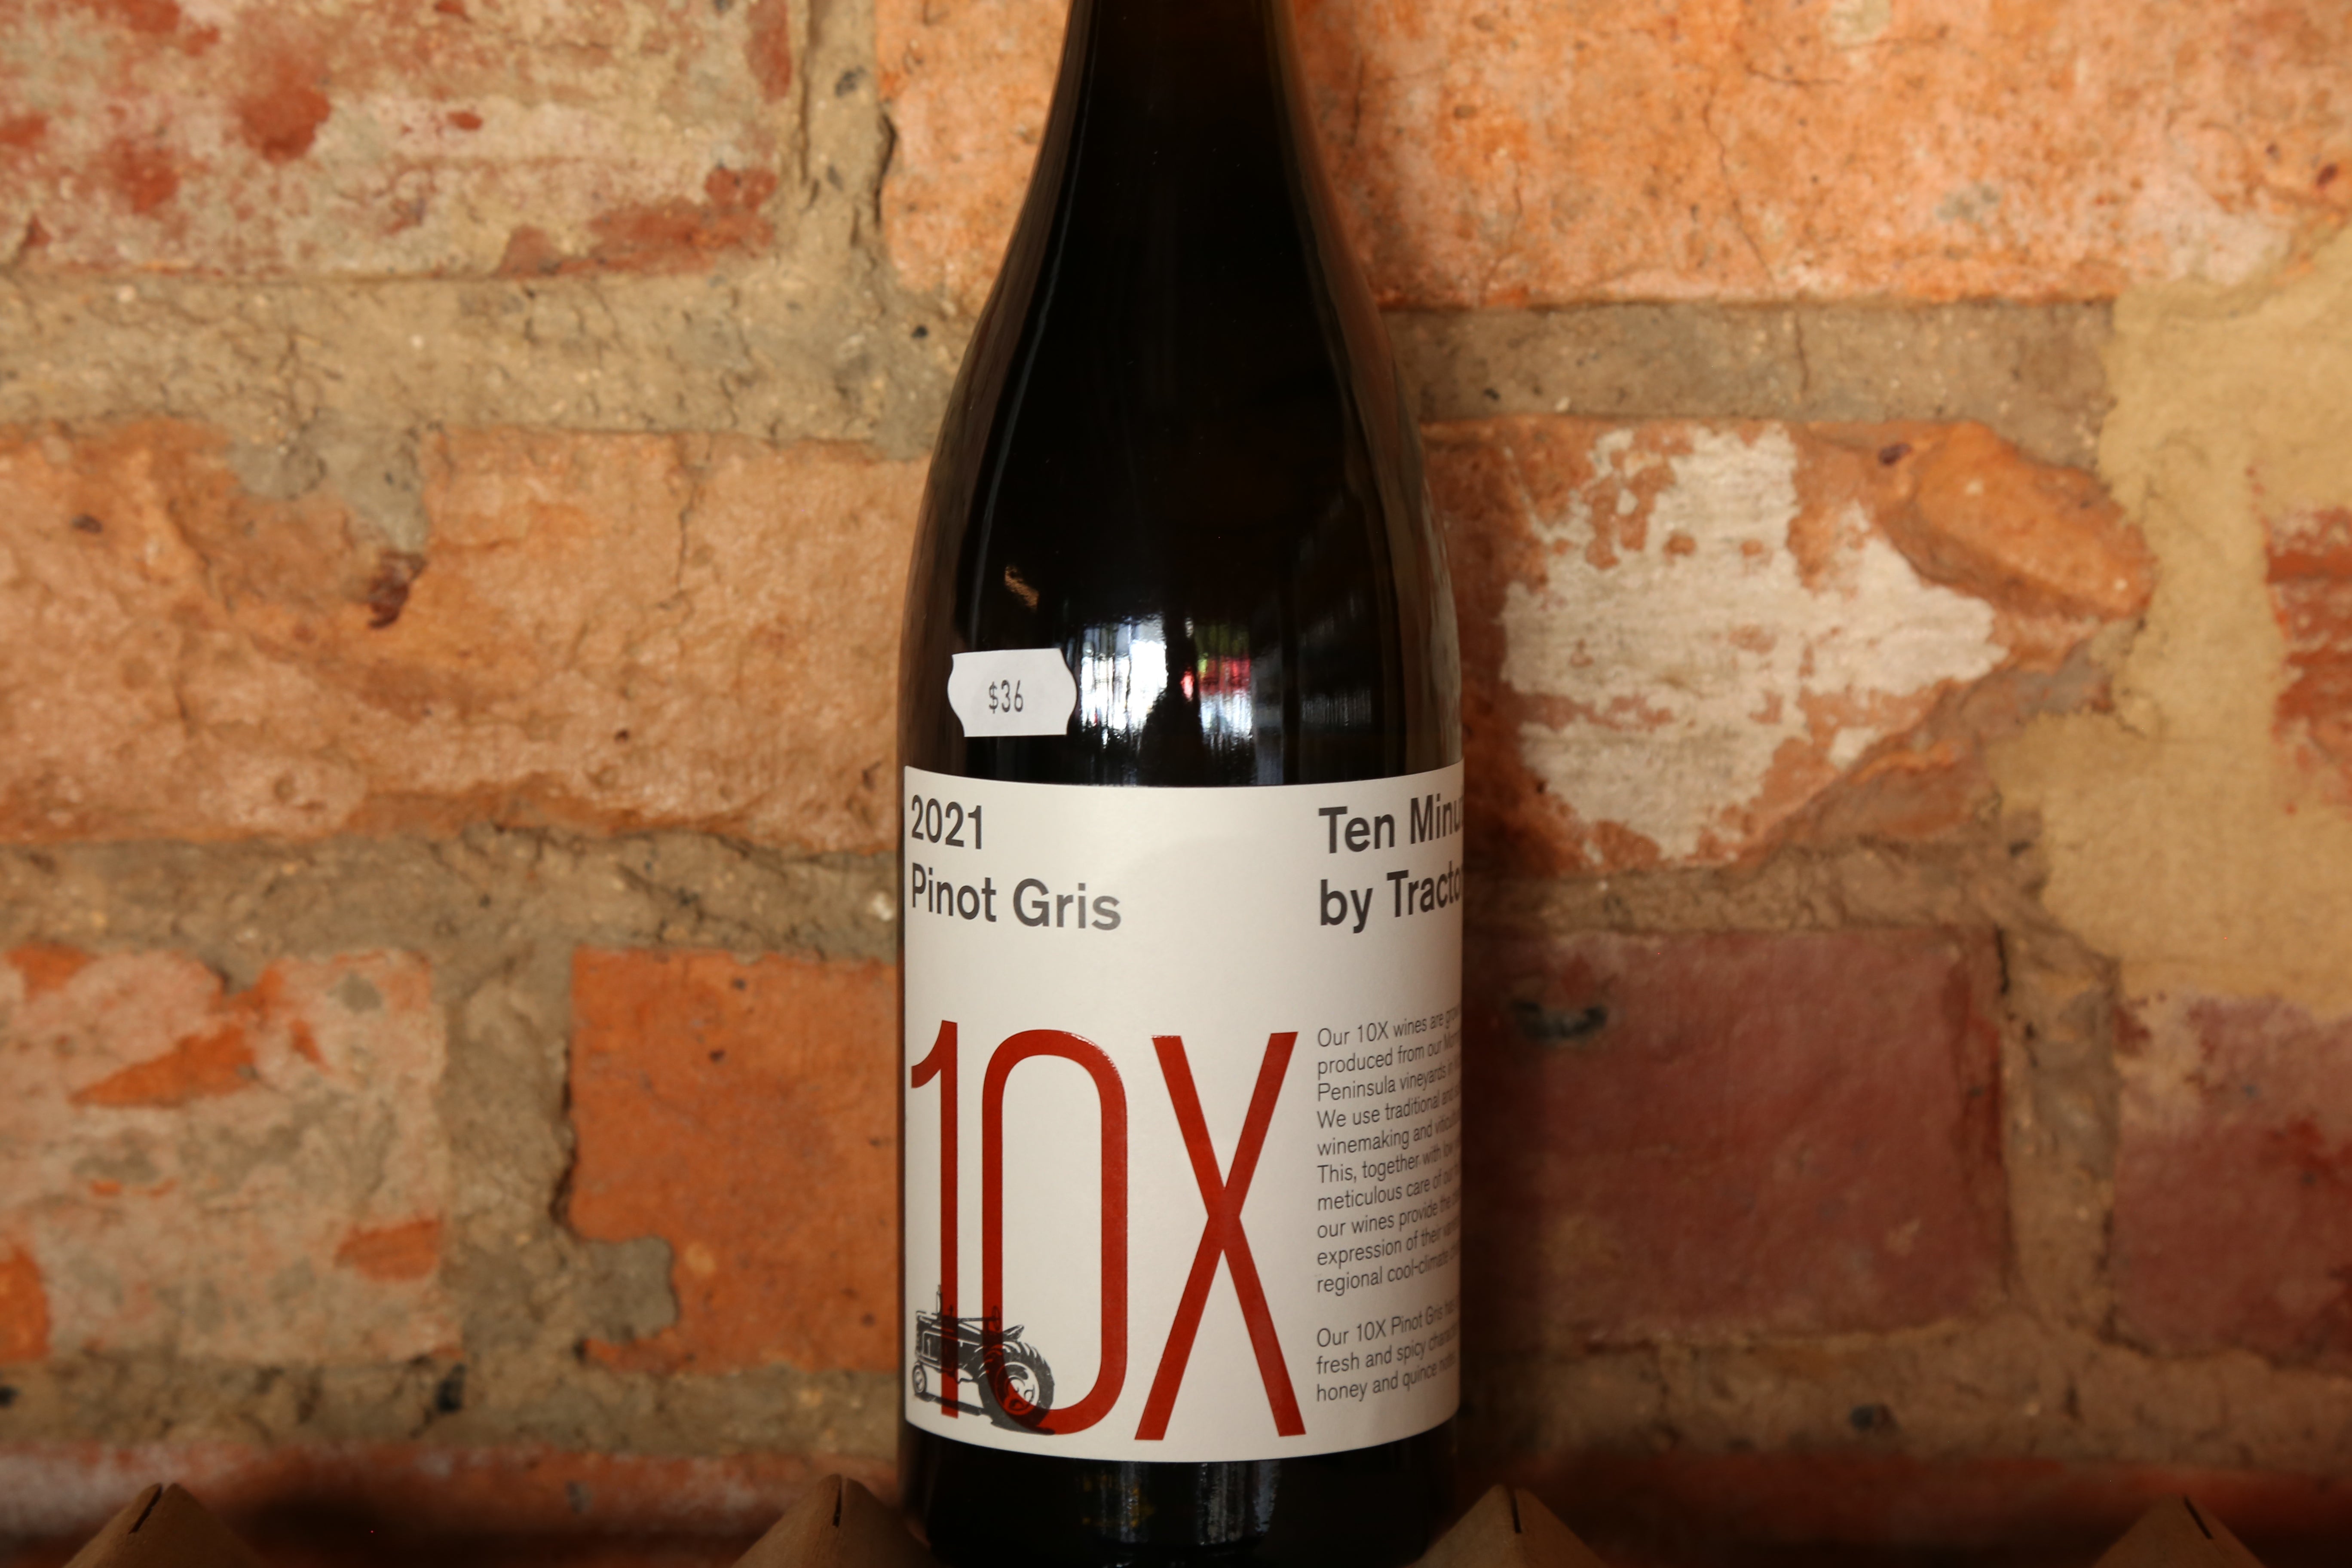 Ten Minutes by Tractor 10X Pinot Gris 2021